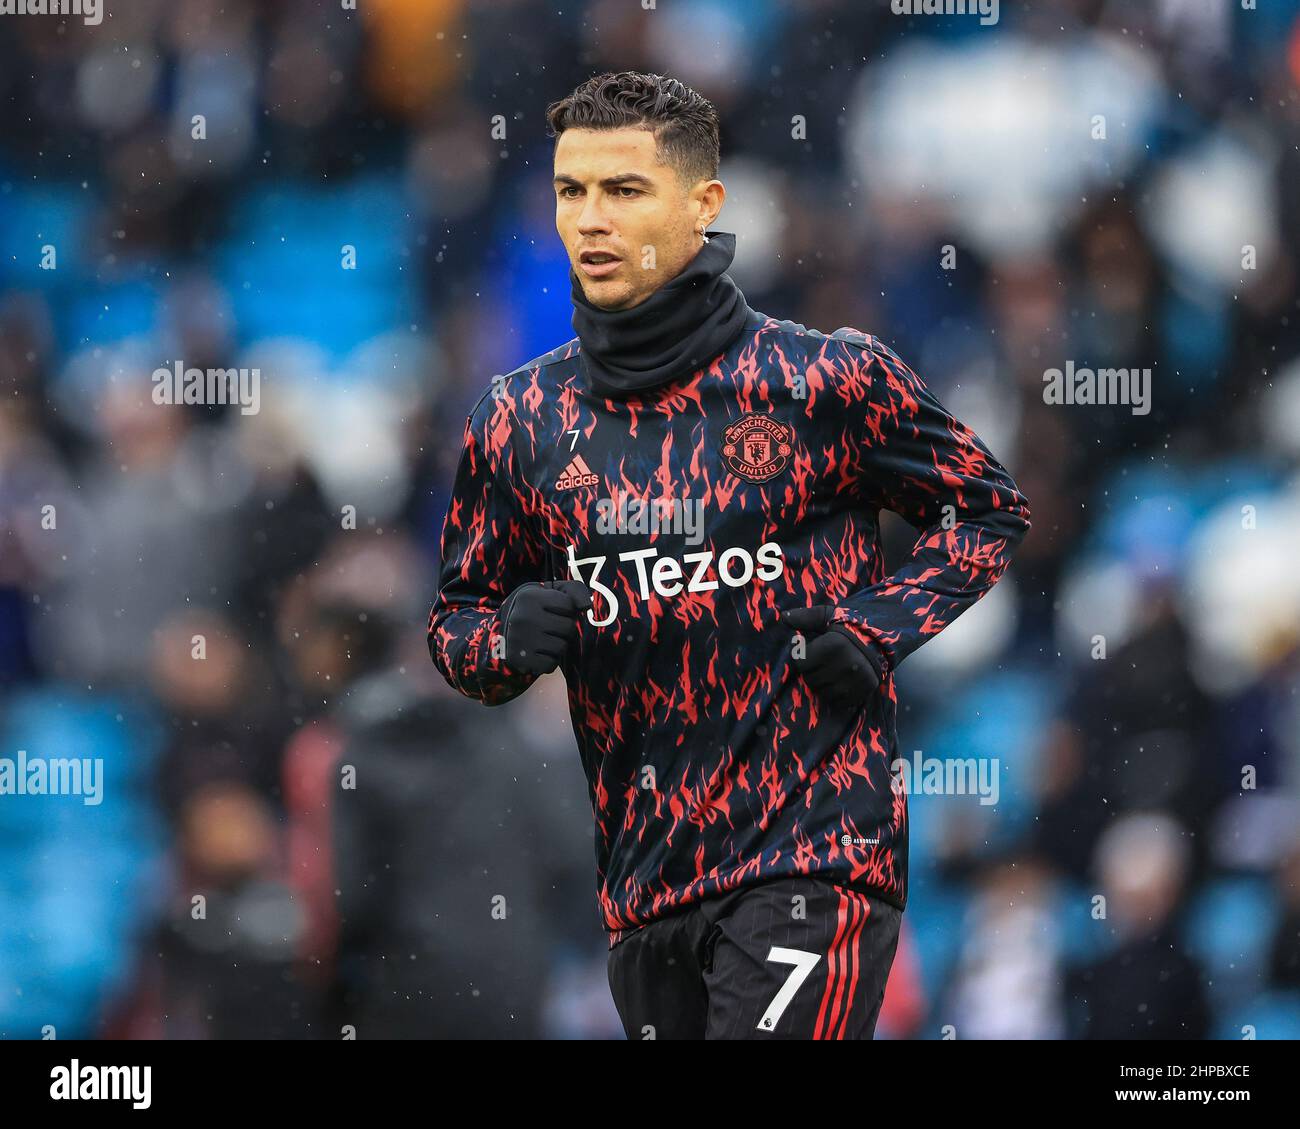 Cristiano Ronaldo #7 of Manchester United during the pre-game warmup in ,  on 2/20/2022. (Photo by Mark Cosgrove/News Images/Sipa USA) Stock Photo